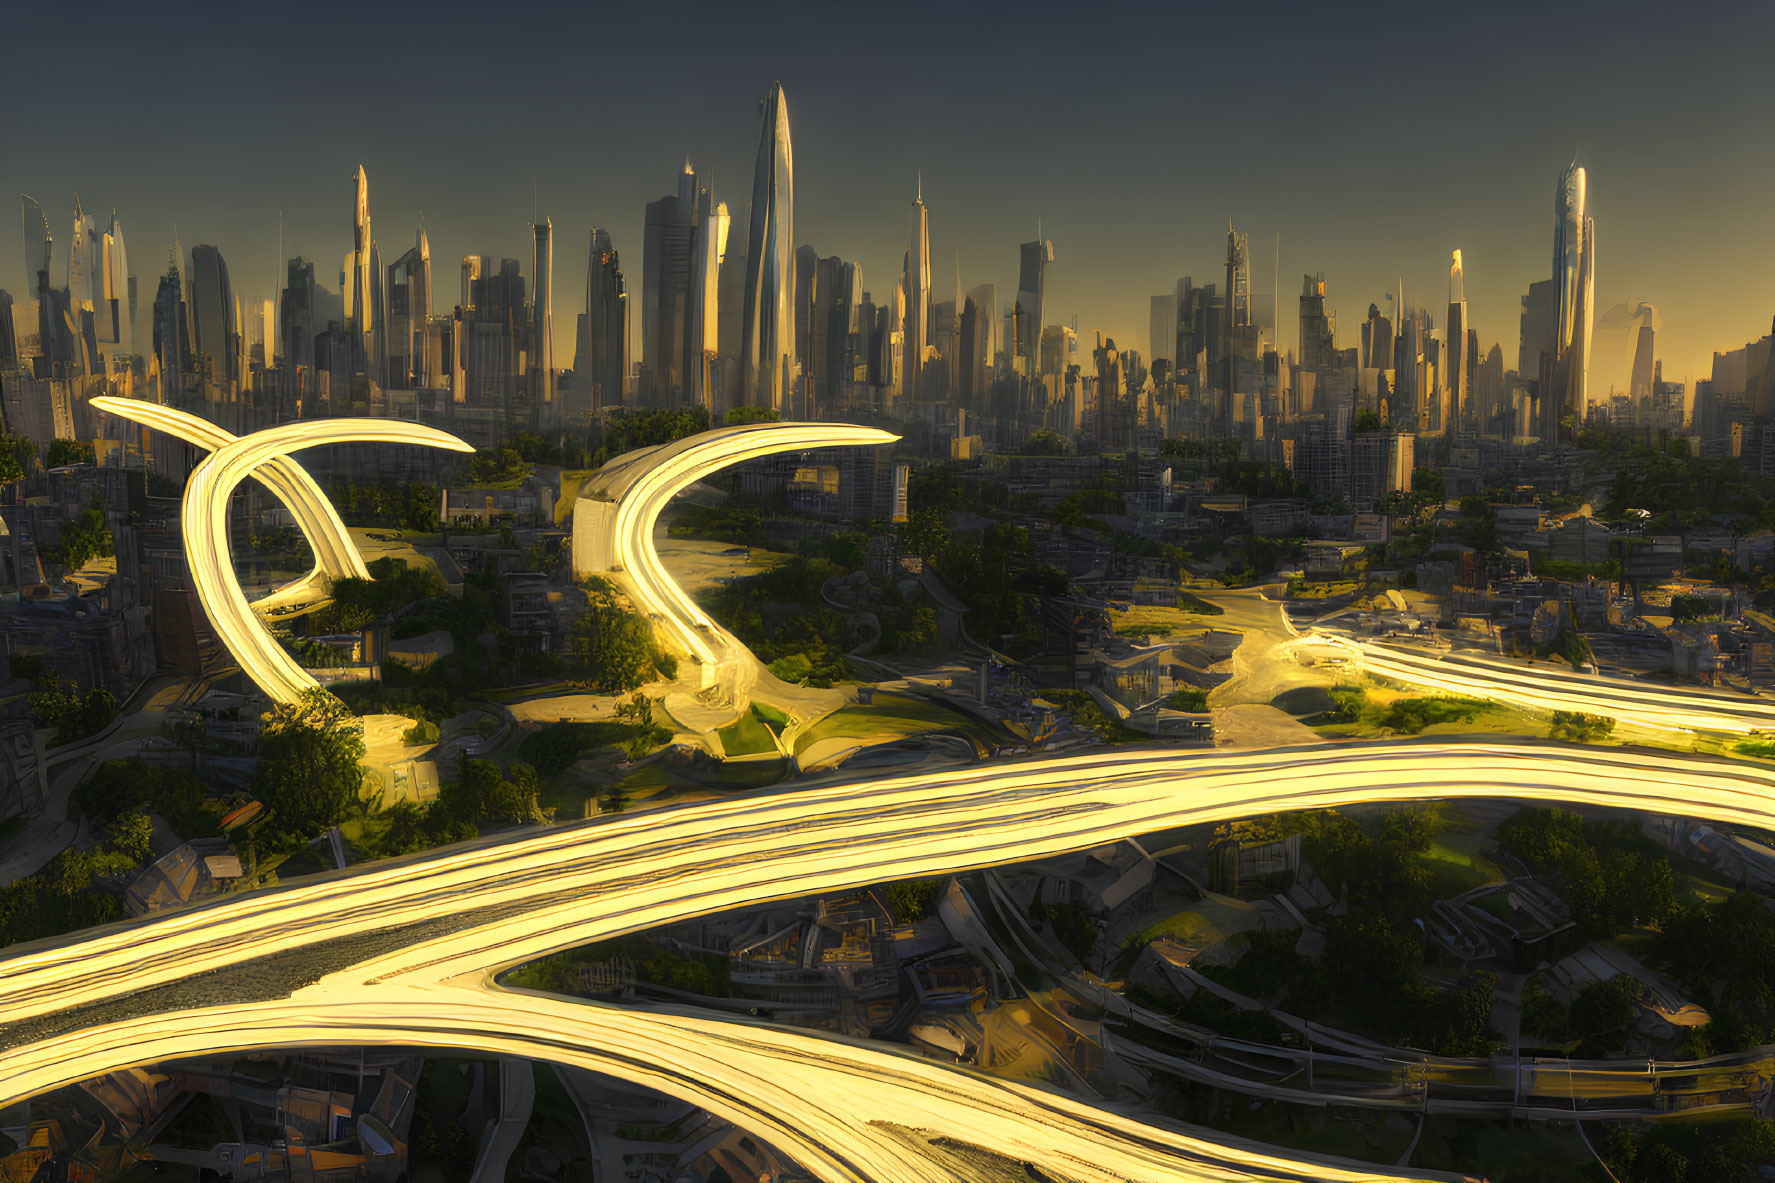 Futuristic cityscape with curving highways and towering skyscrapers at sunset